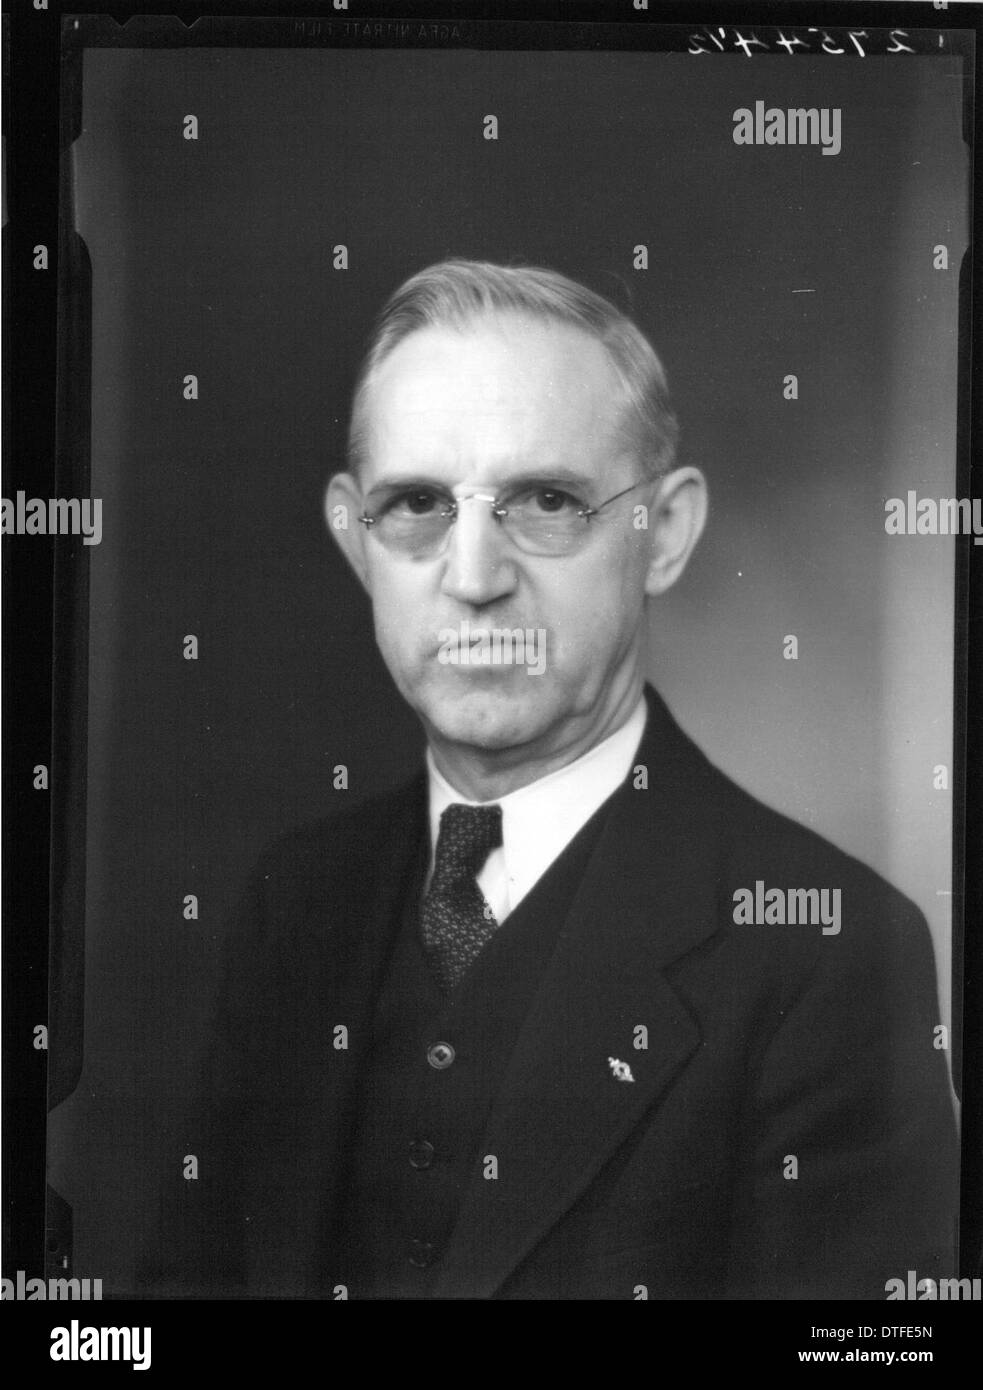 Portrait photograph of Frank R. Snyder 1936 Stock Photo